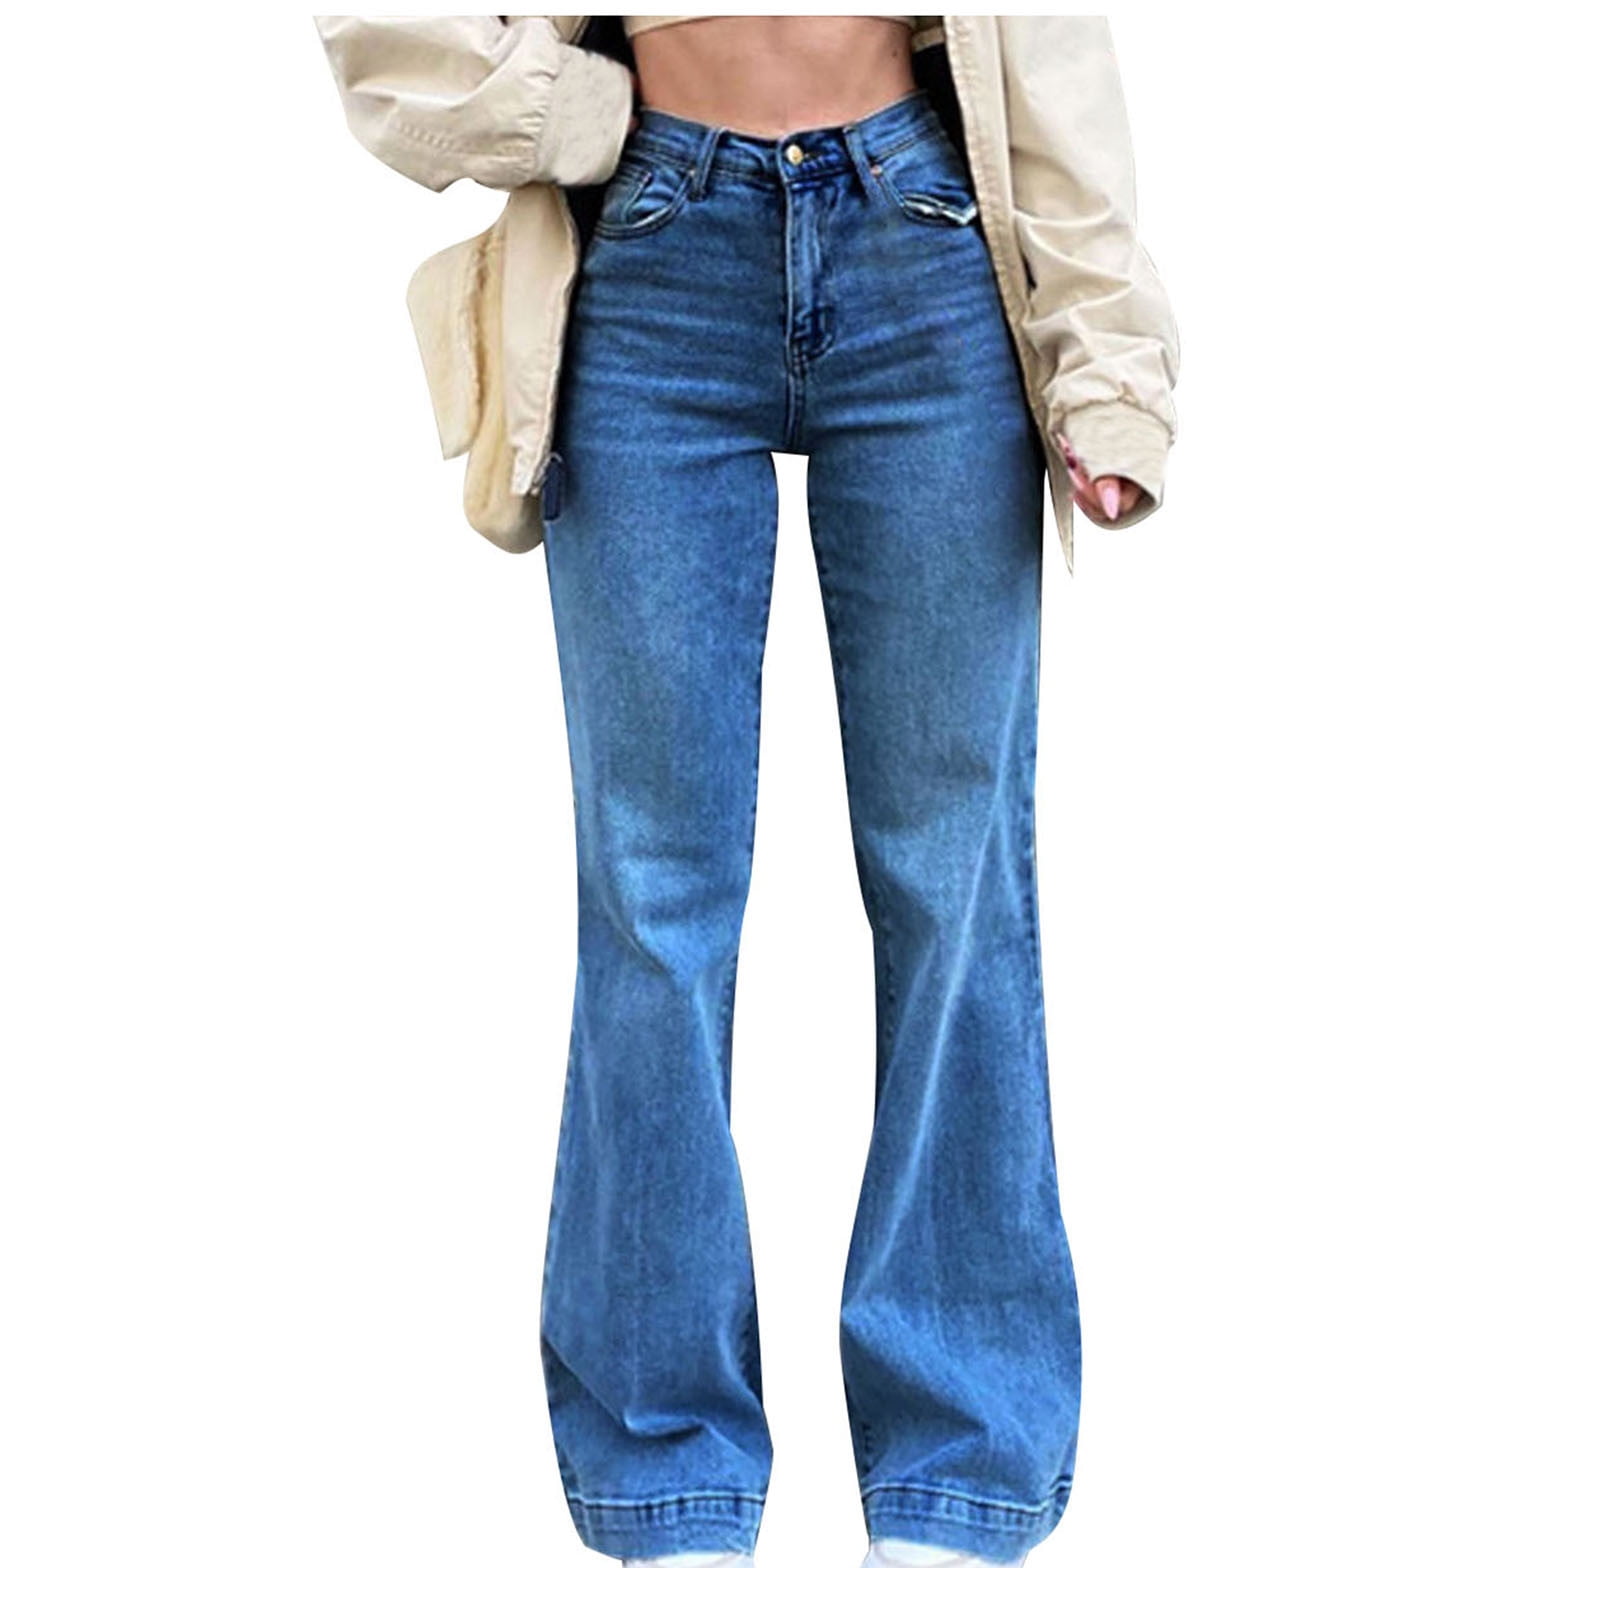 Bell Bottoms Jeans - Buy Bell Bottoms Jeans Online Starting at